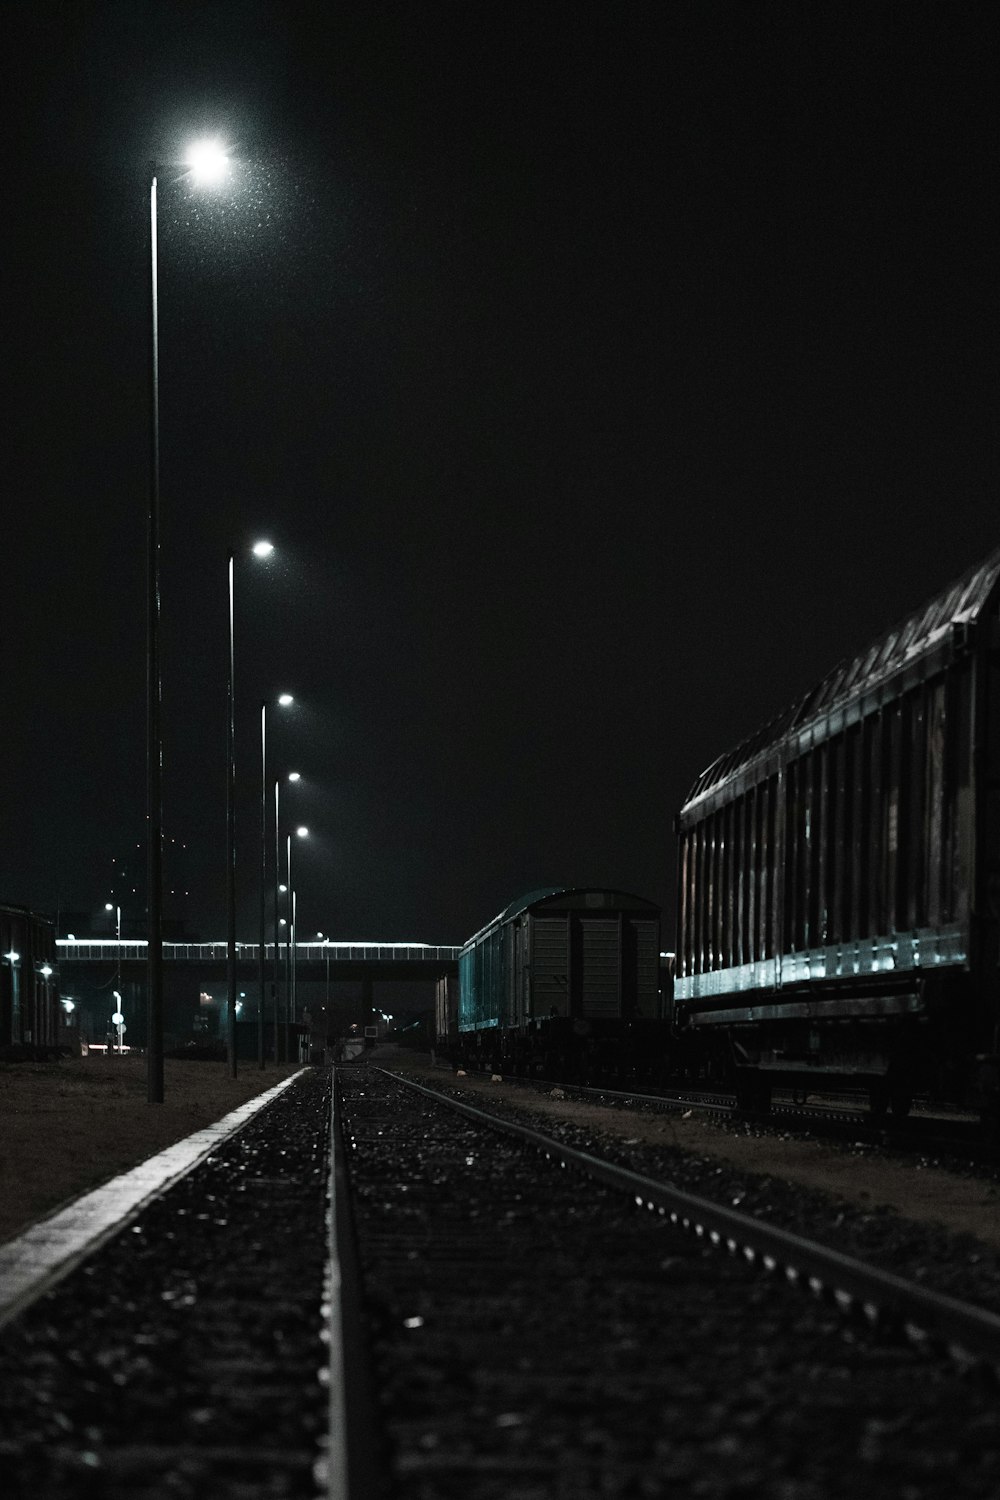 train station with lights turned on during night time